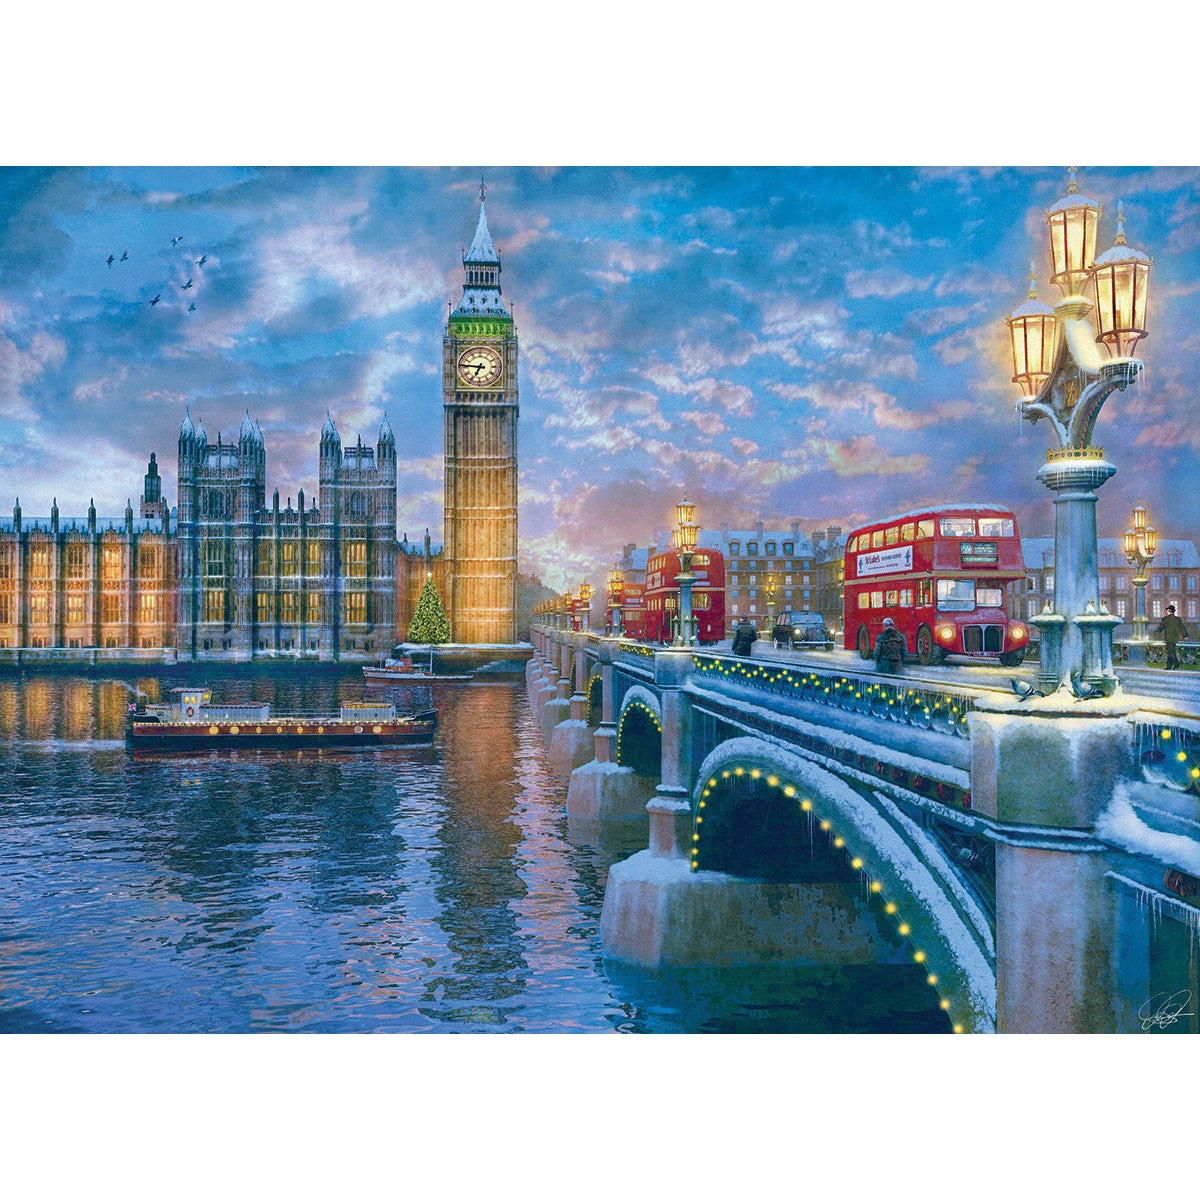 Christmas Eve in London 1000 Piece Jigsaw Puzzle Eurographics